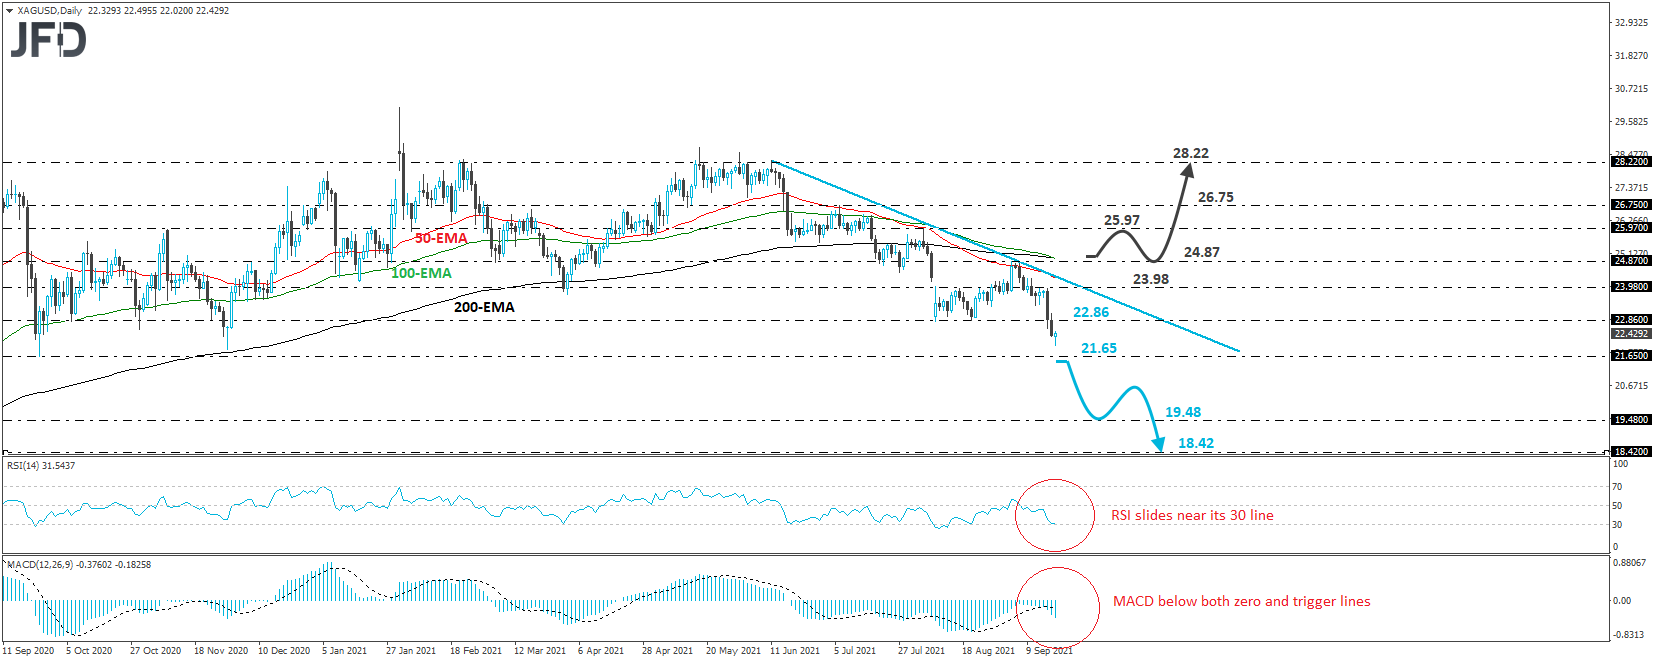 Technical analysis of the XAG / USD silver daily chart